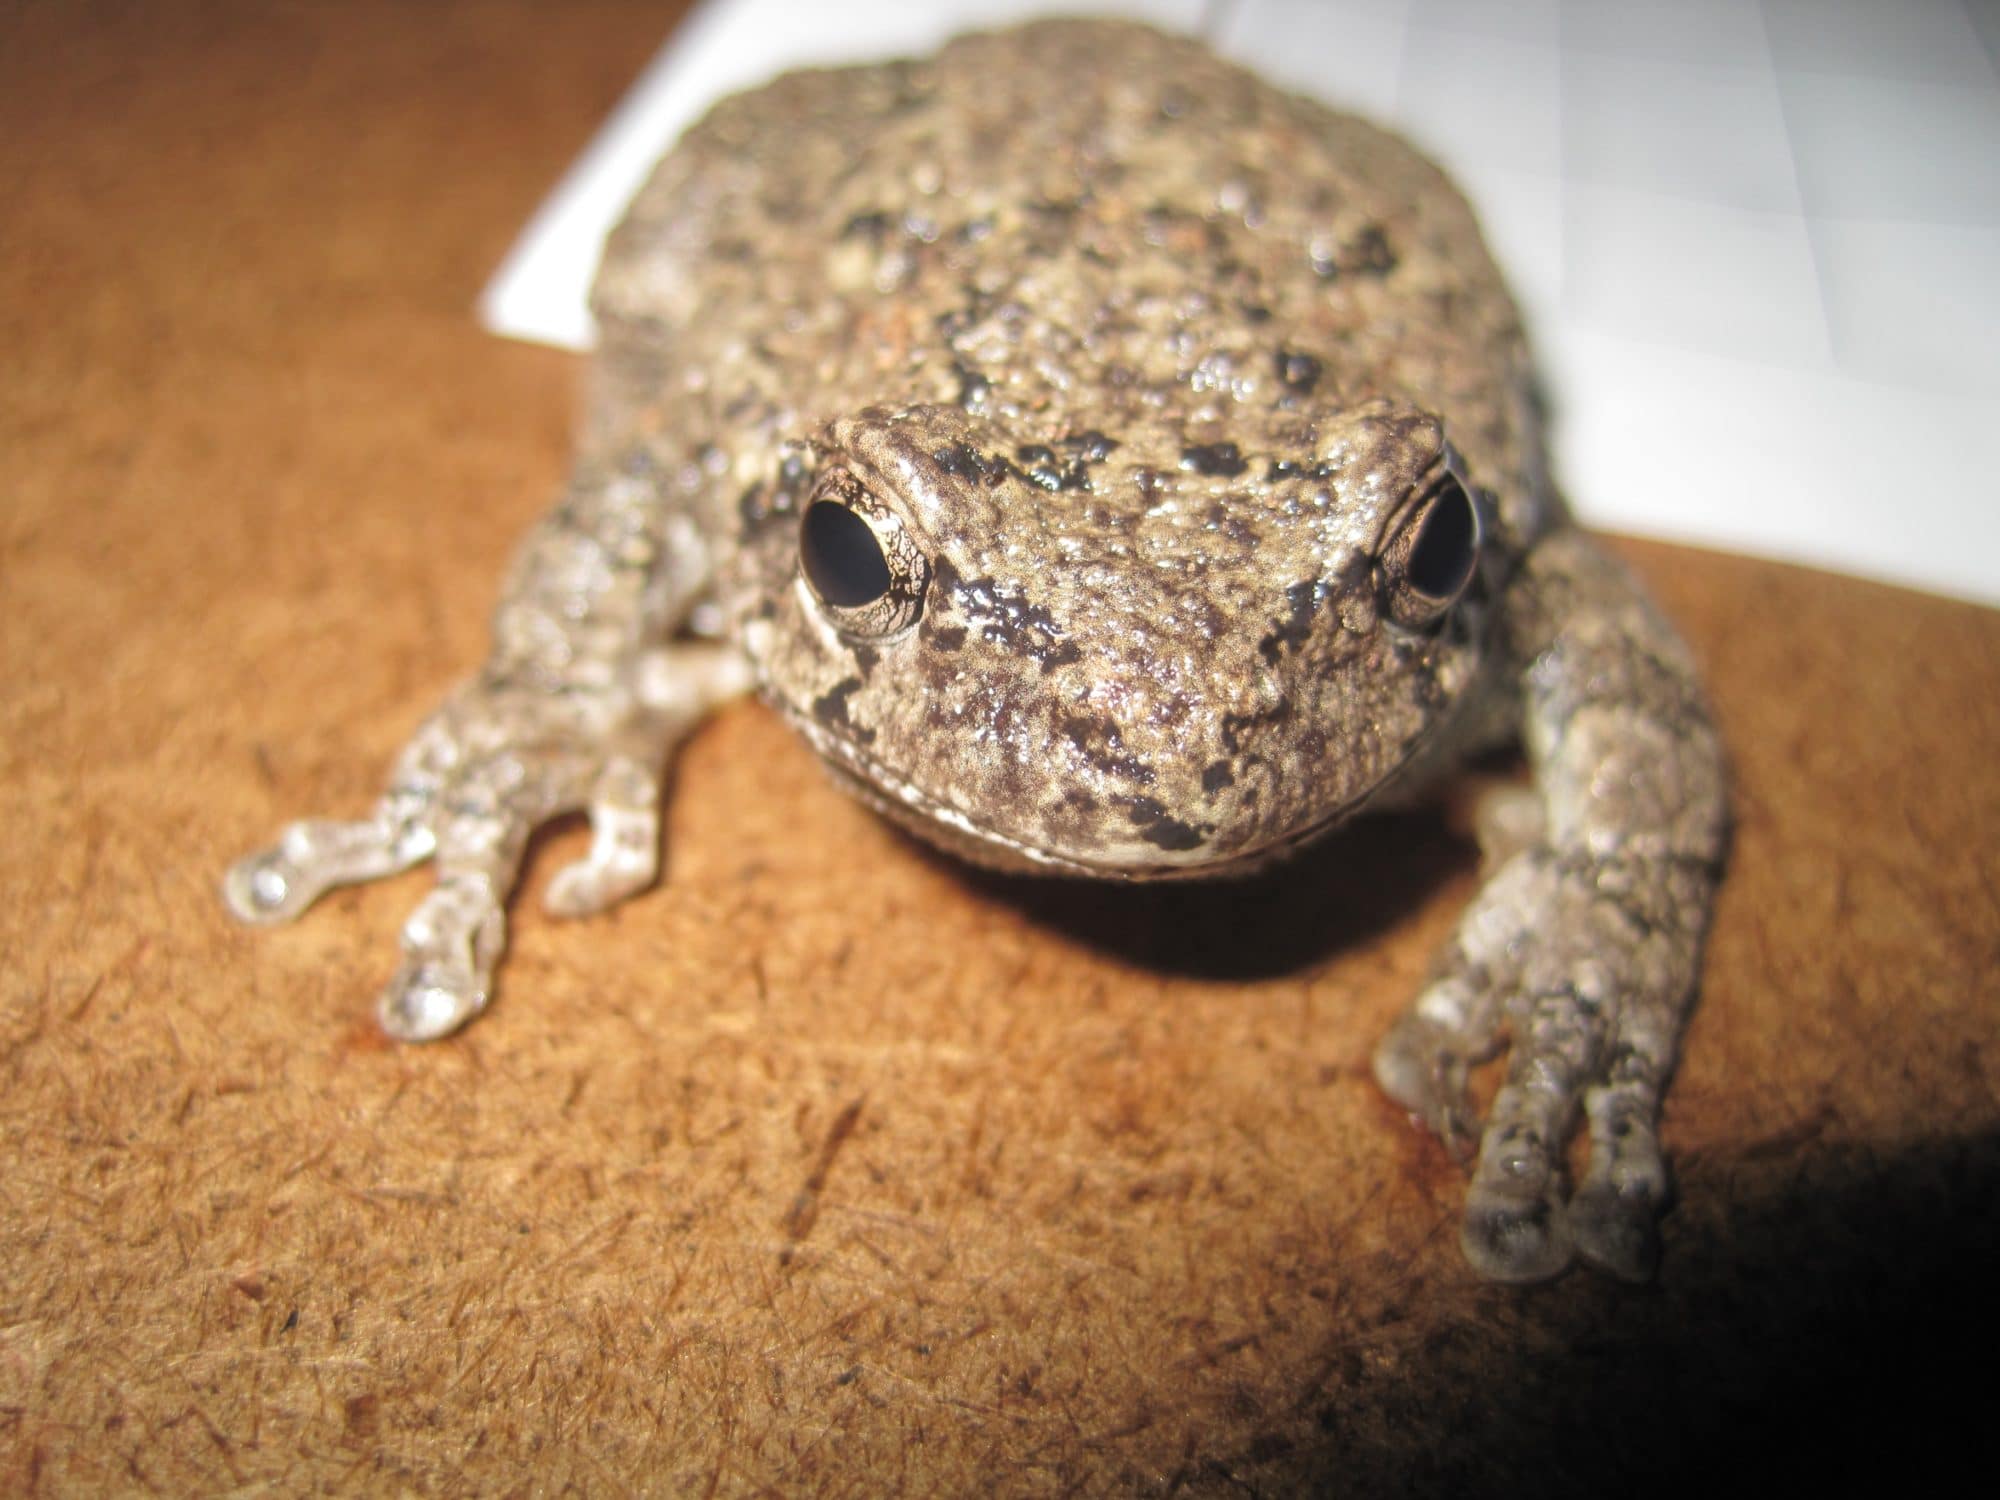 A gray tree frog rests on a clipboard during the late spring amphibian migration. (photo © Brett Amy Thelen)